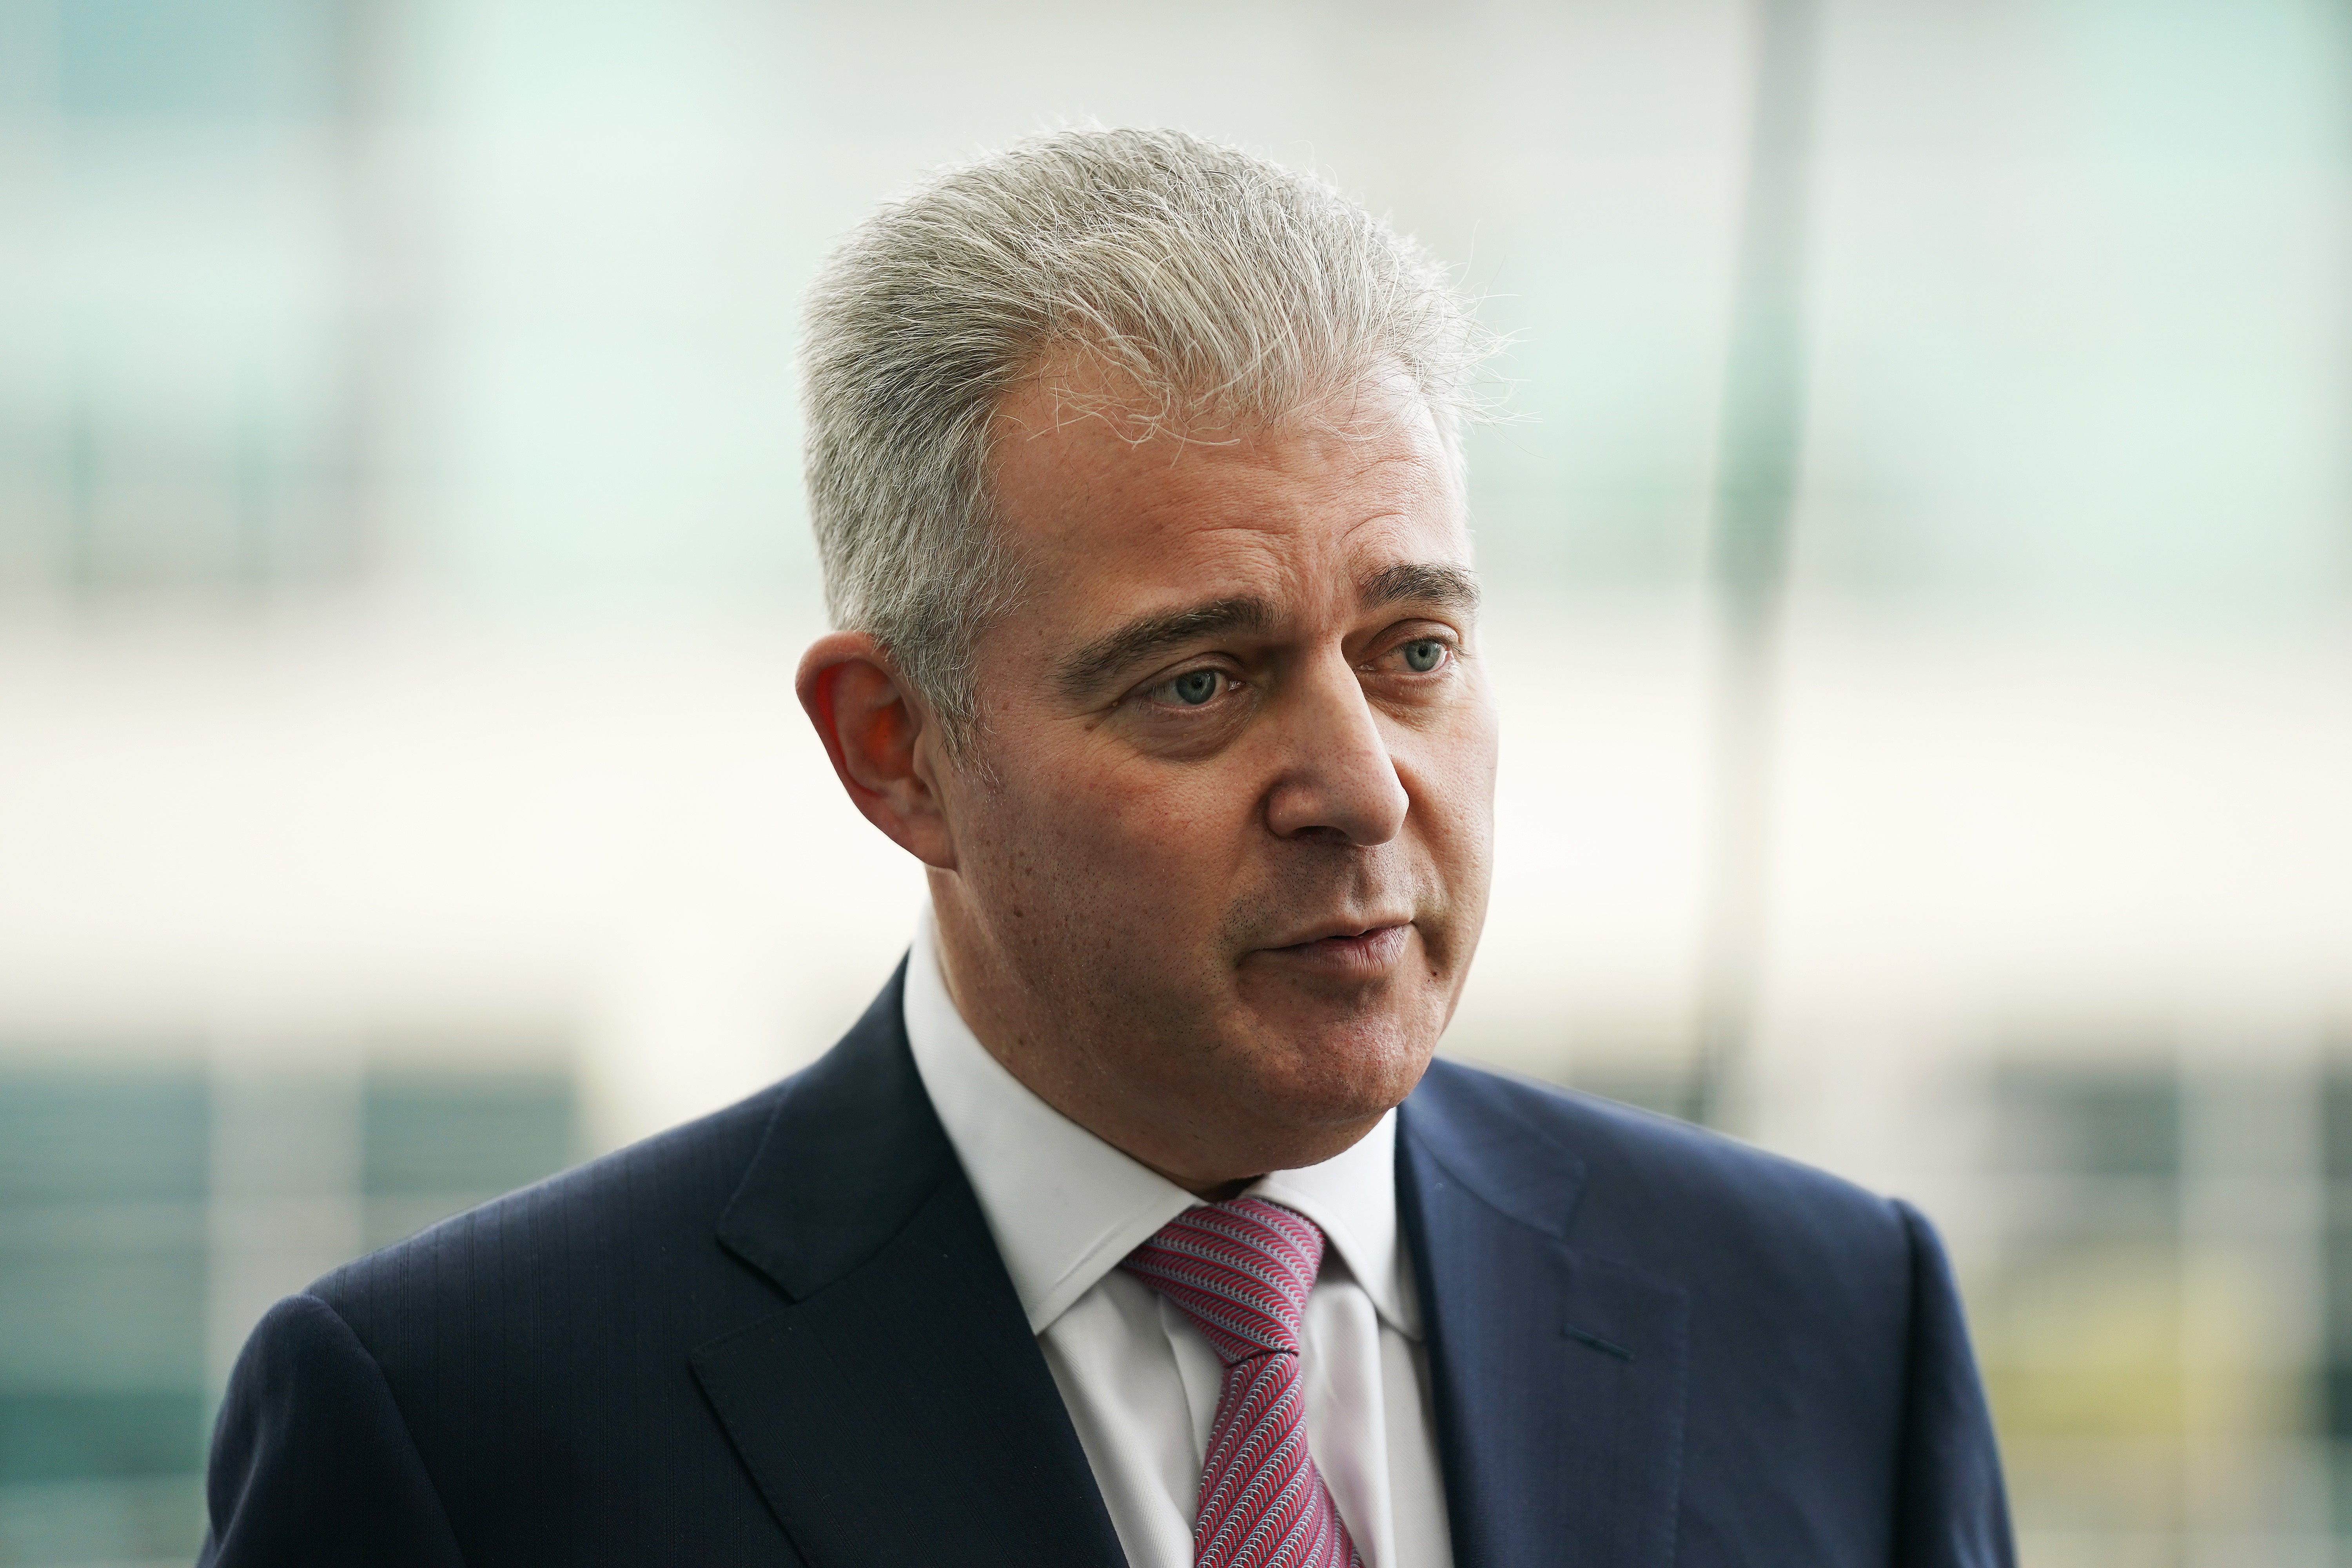 Northern Ireland Secretary Brandon Lewis says he hopes to see powersharing return as soon as possible after the election (Brian Lawless/PA)